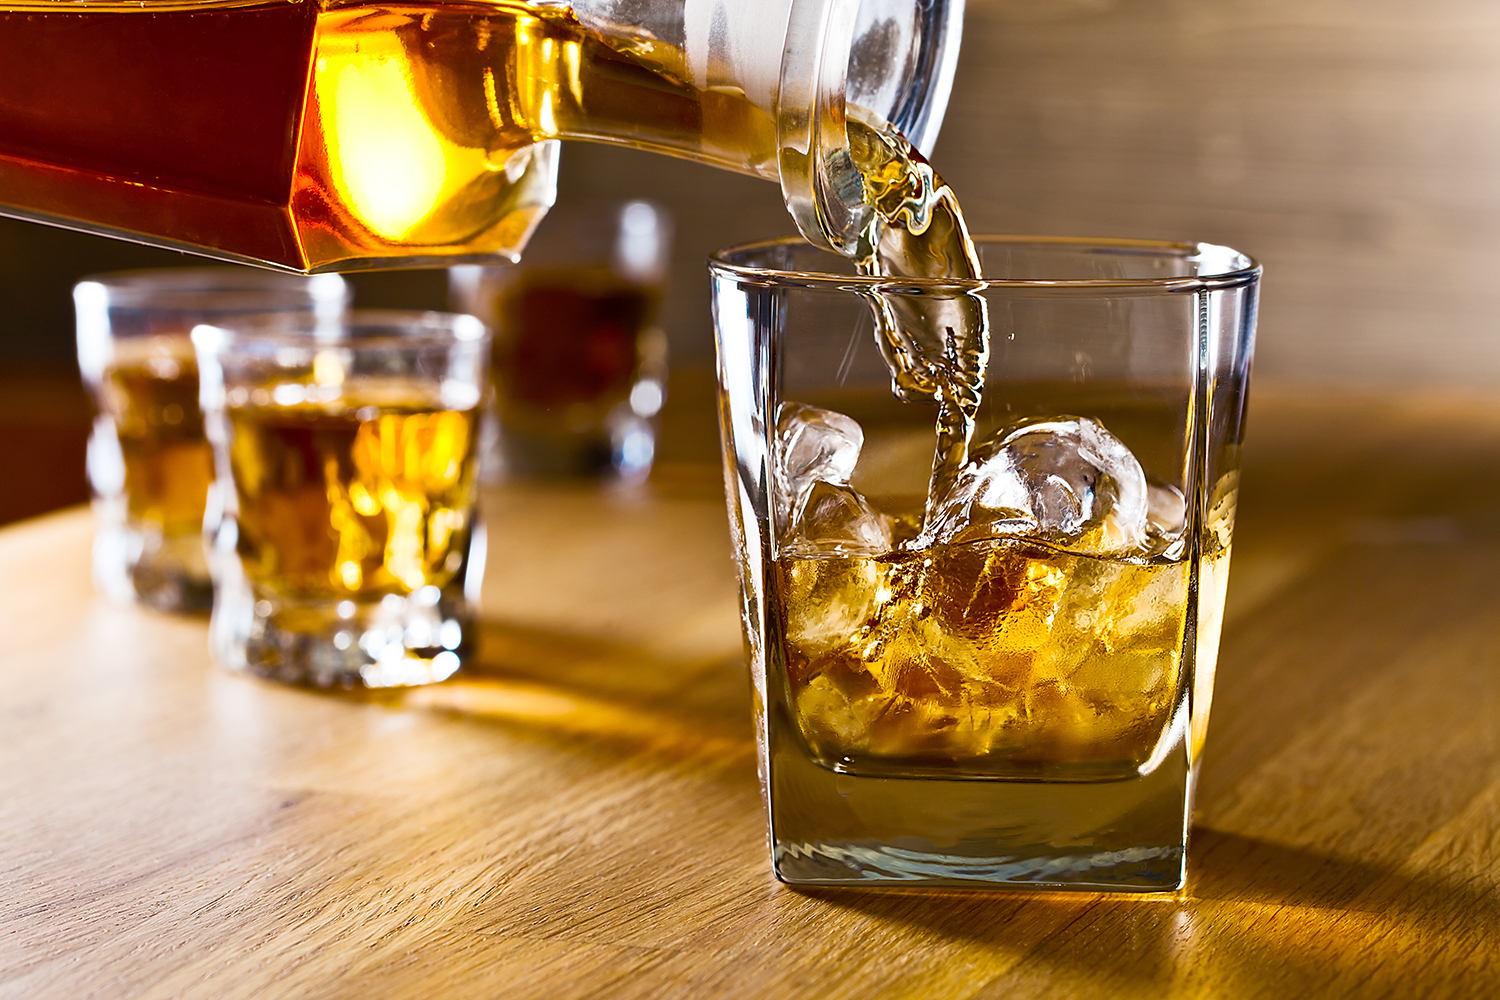 Alcohol Causes Immediate Effects Linked to Heart Malady